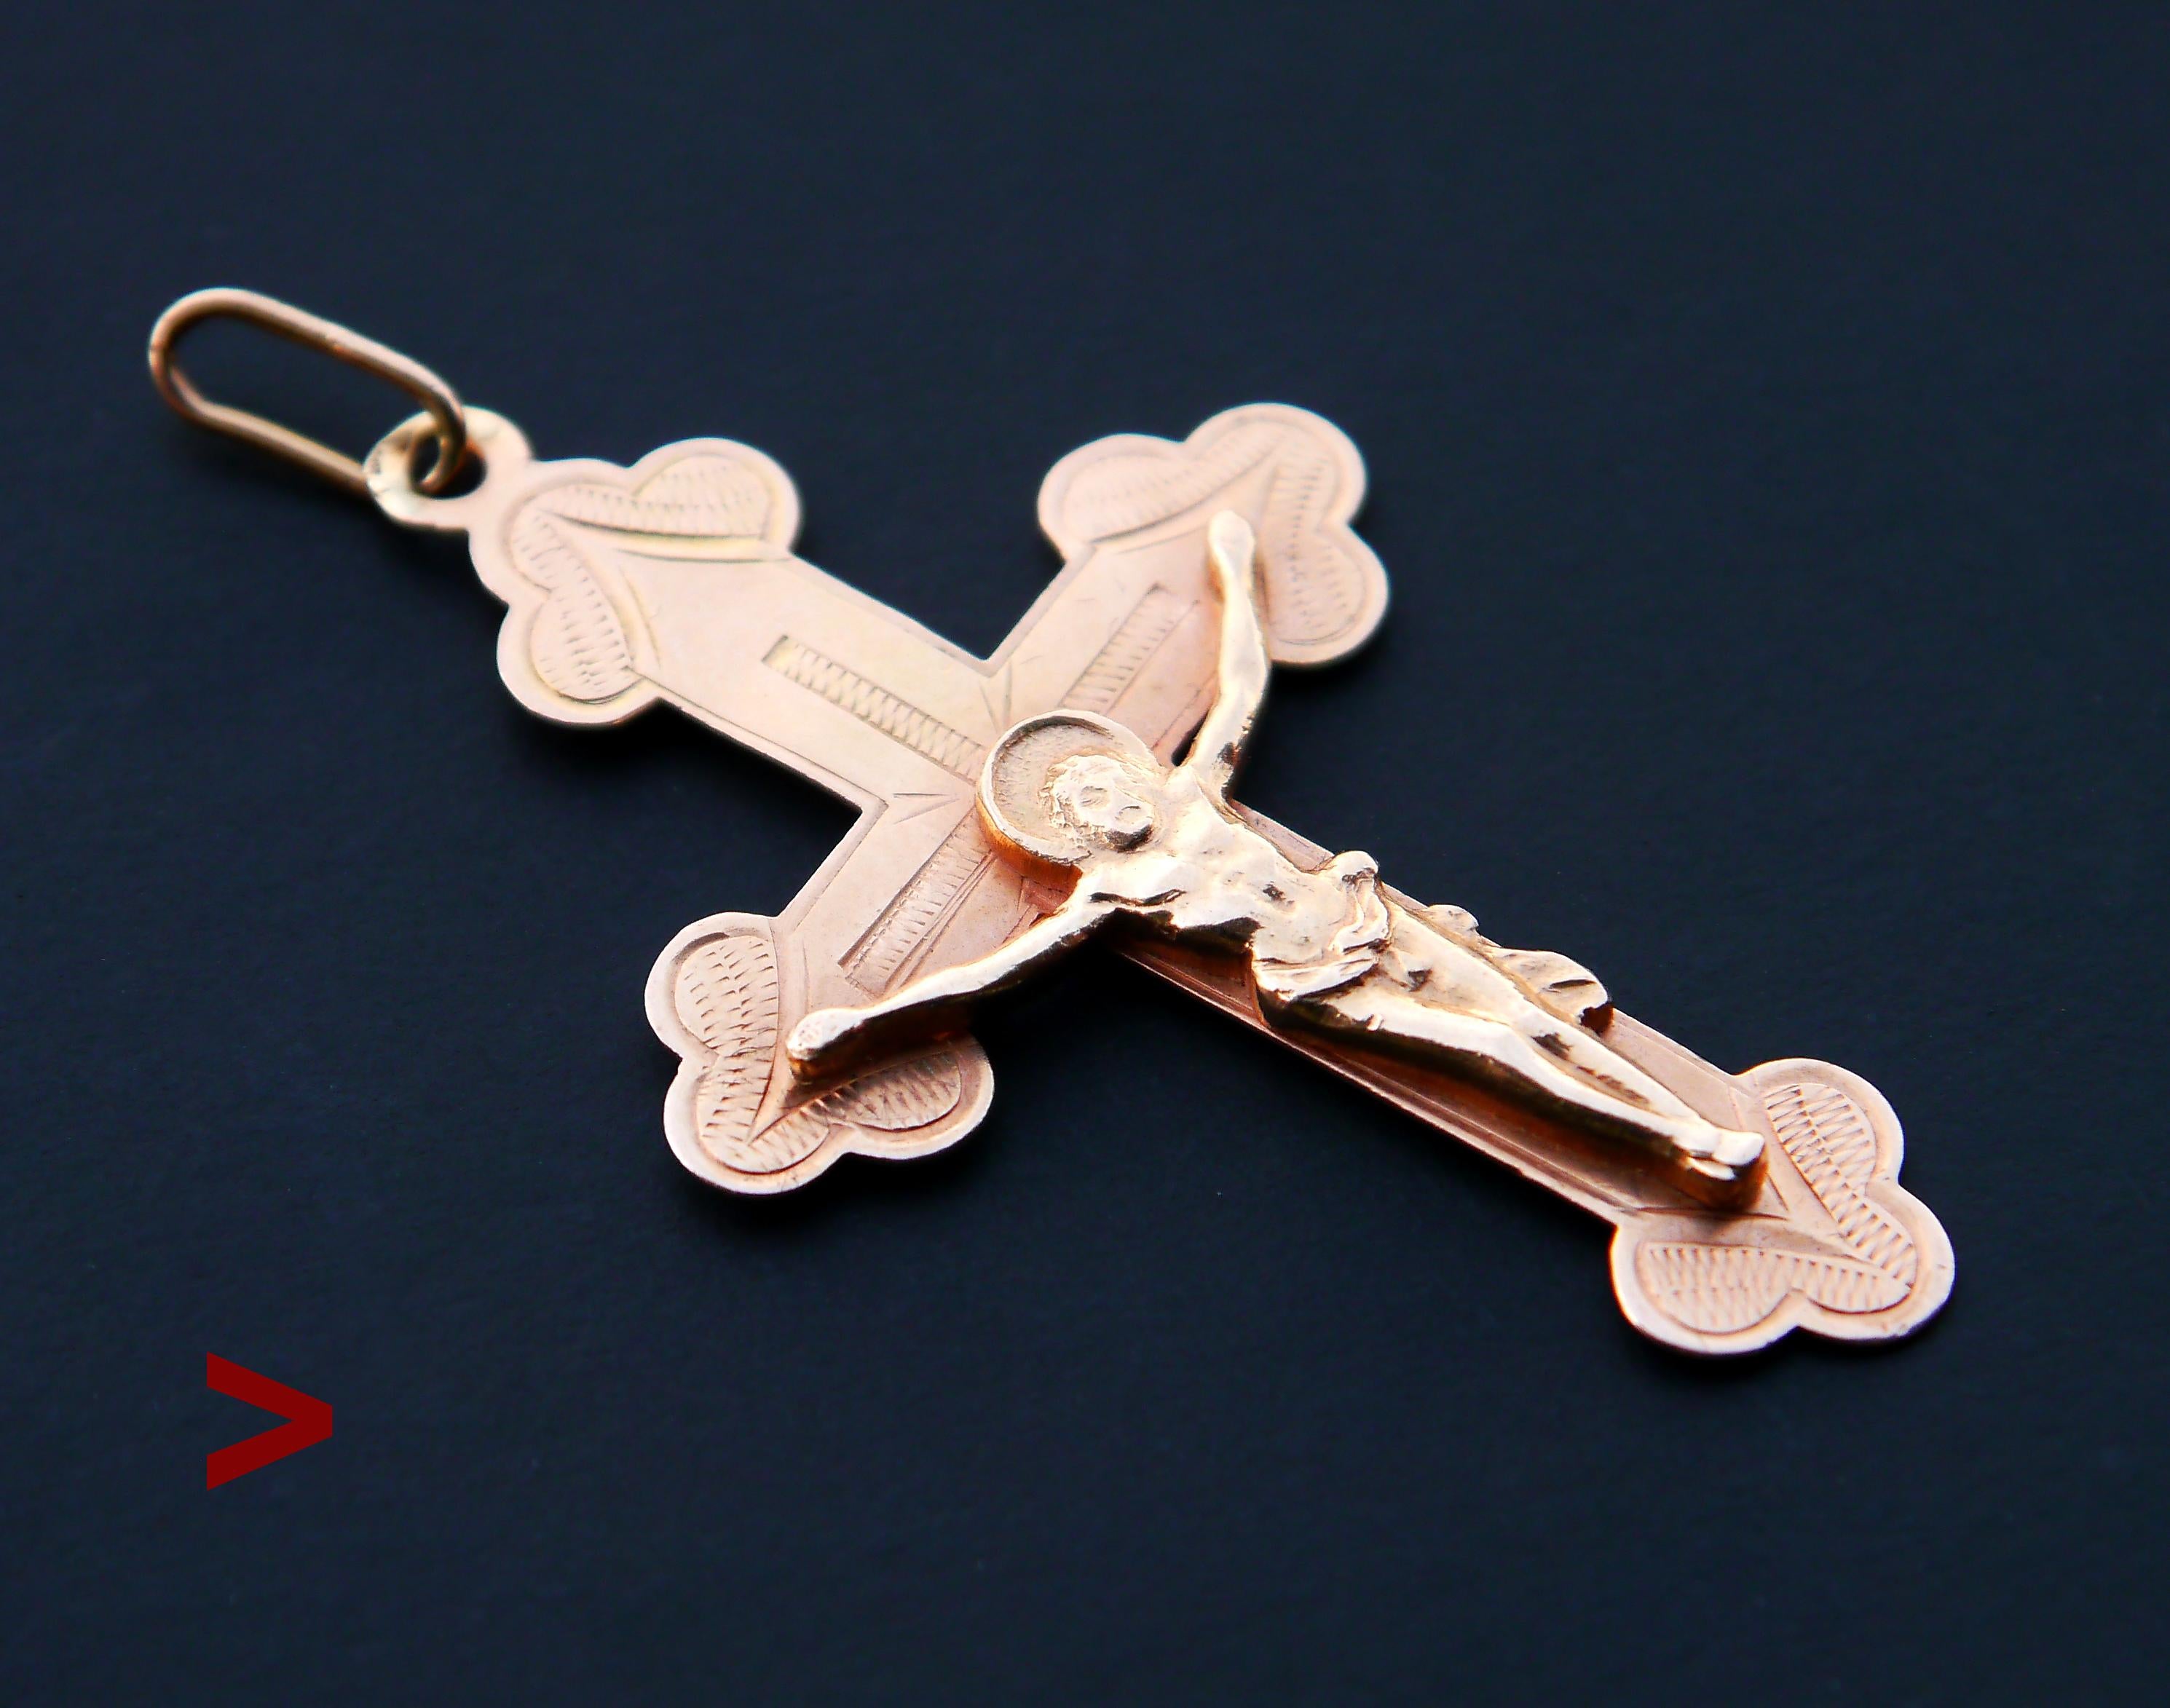 Russian Orthodox Cross pendant in solid 56 / 14K Rose Gold and Yellow (body of Christ ) Gold. Detailed depiction of the Saviour and delicate engravings.
Hallmarked with old Russian Gold standard 56 zolotniks (14K) used between 1908 -1917. Assay of